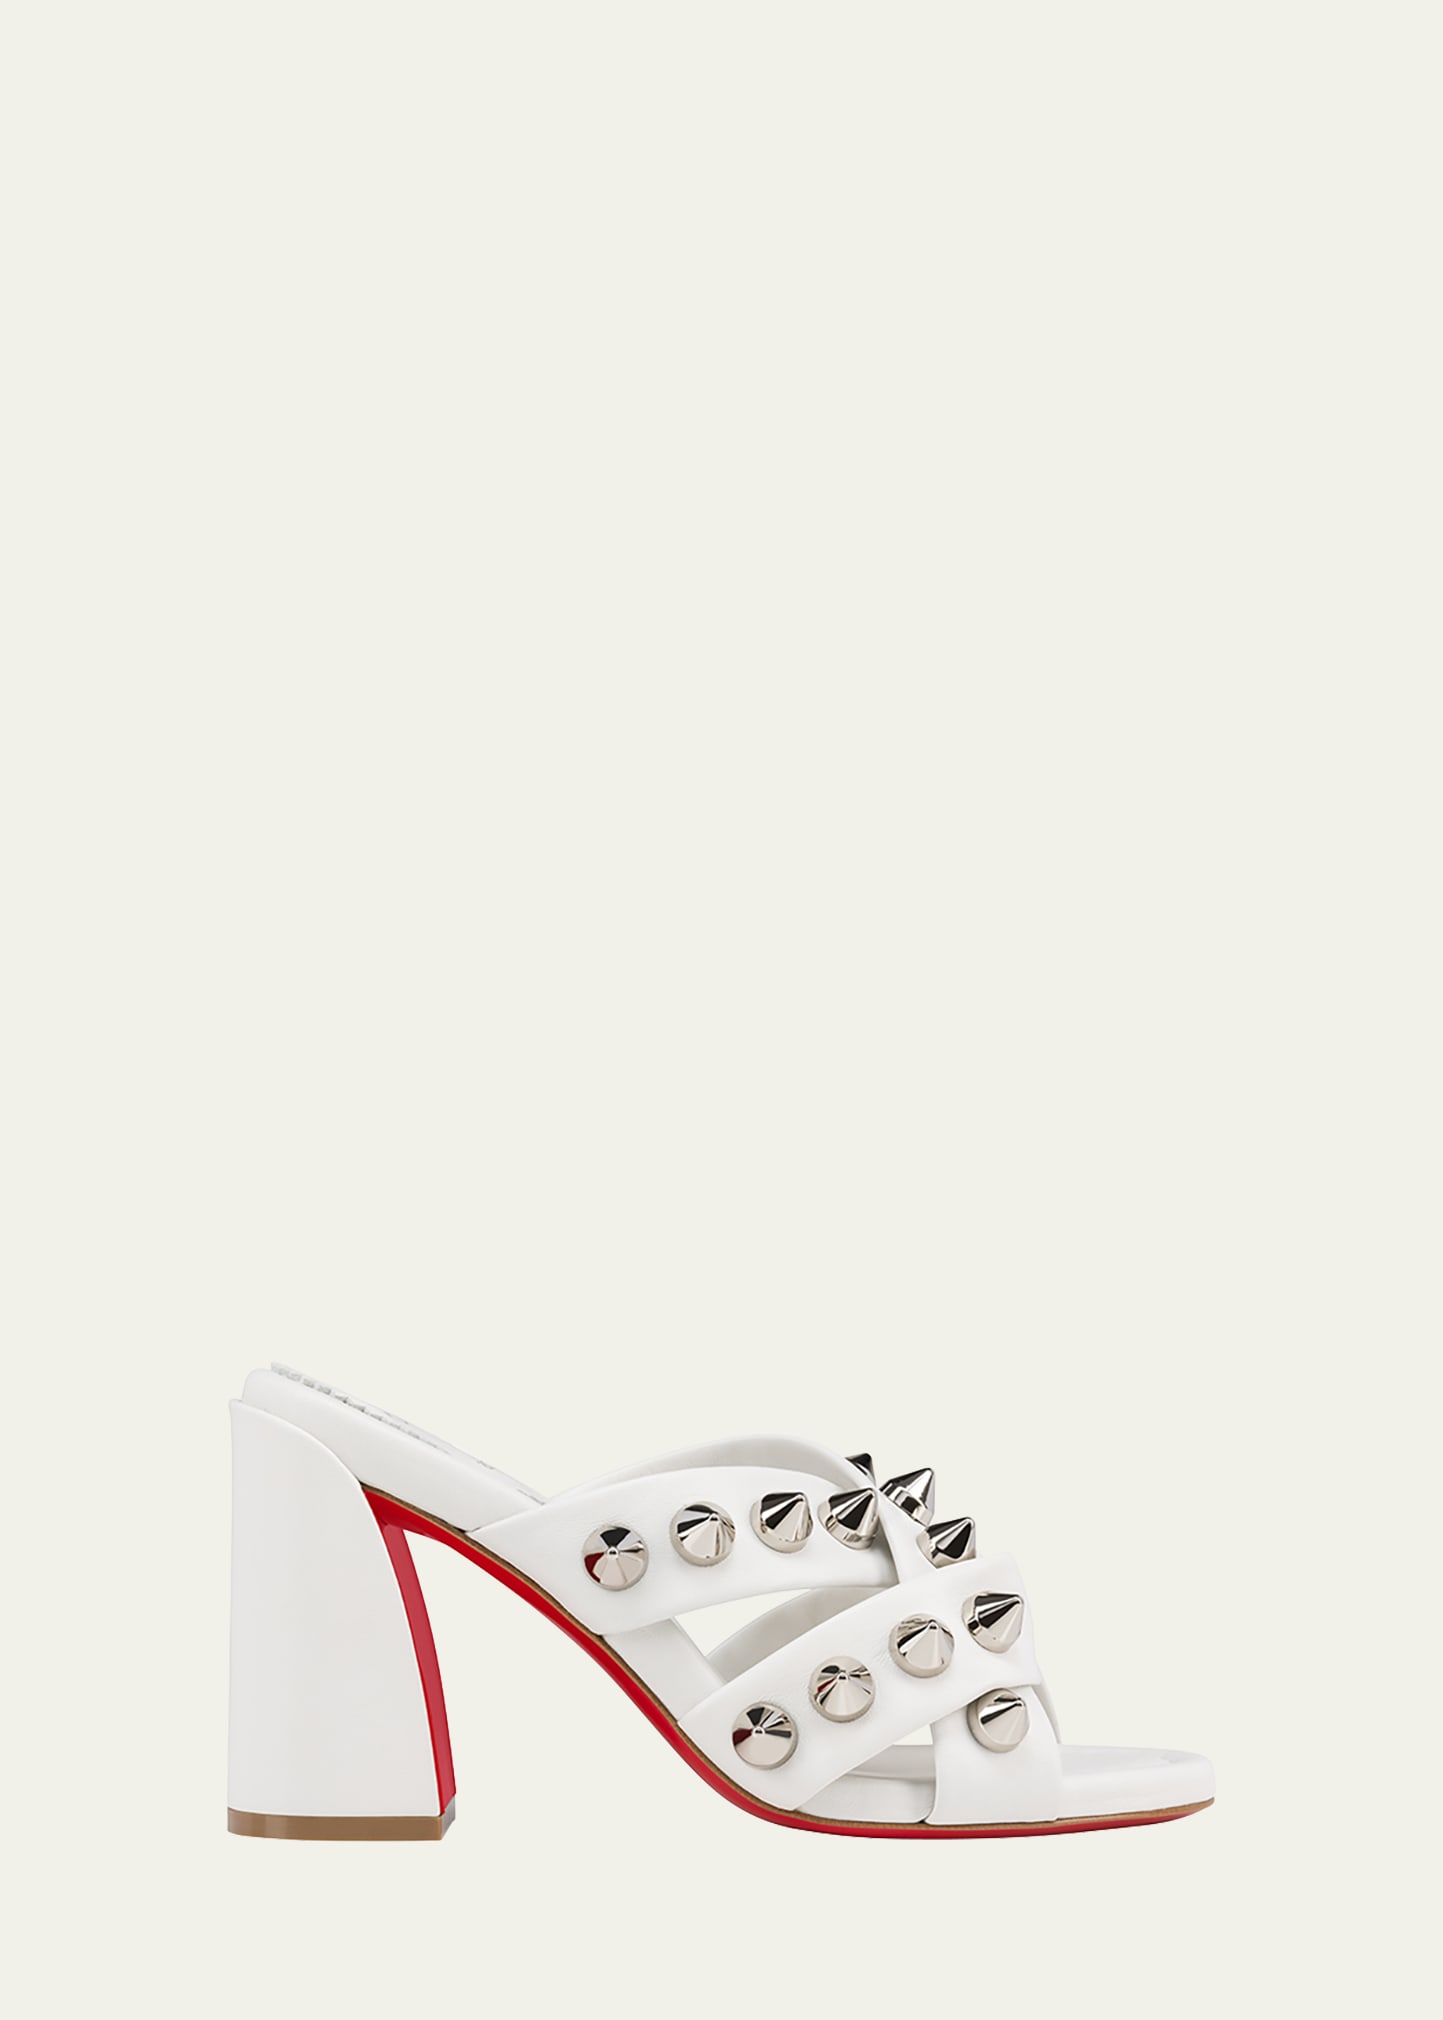 CHRISTIAN LOUBOUTIN SPIKA CLUB CAGED RED SOLE MULE SANDALS